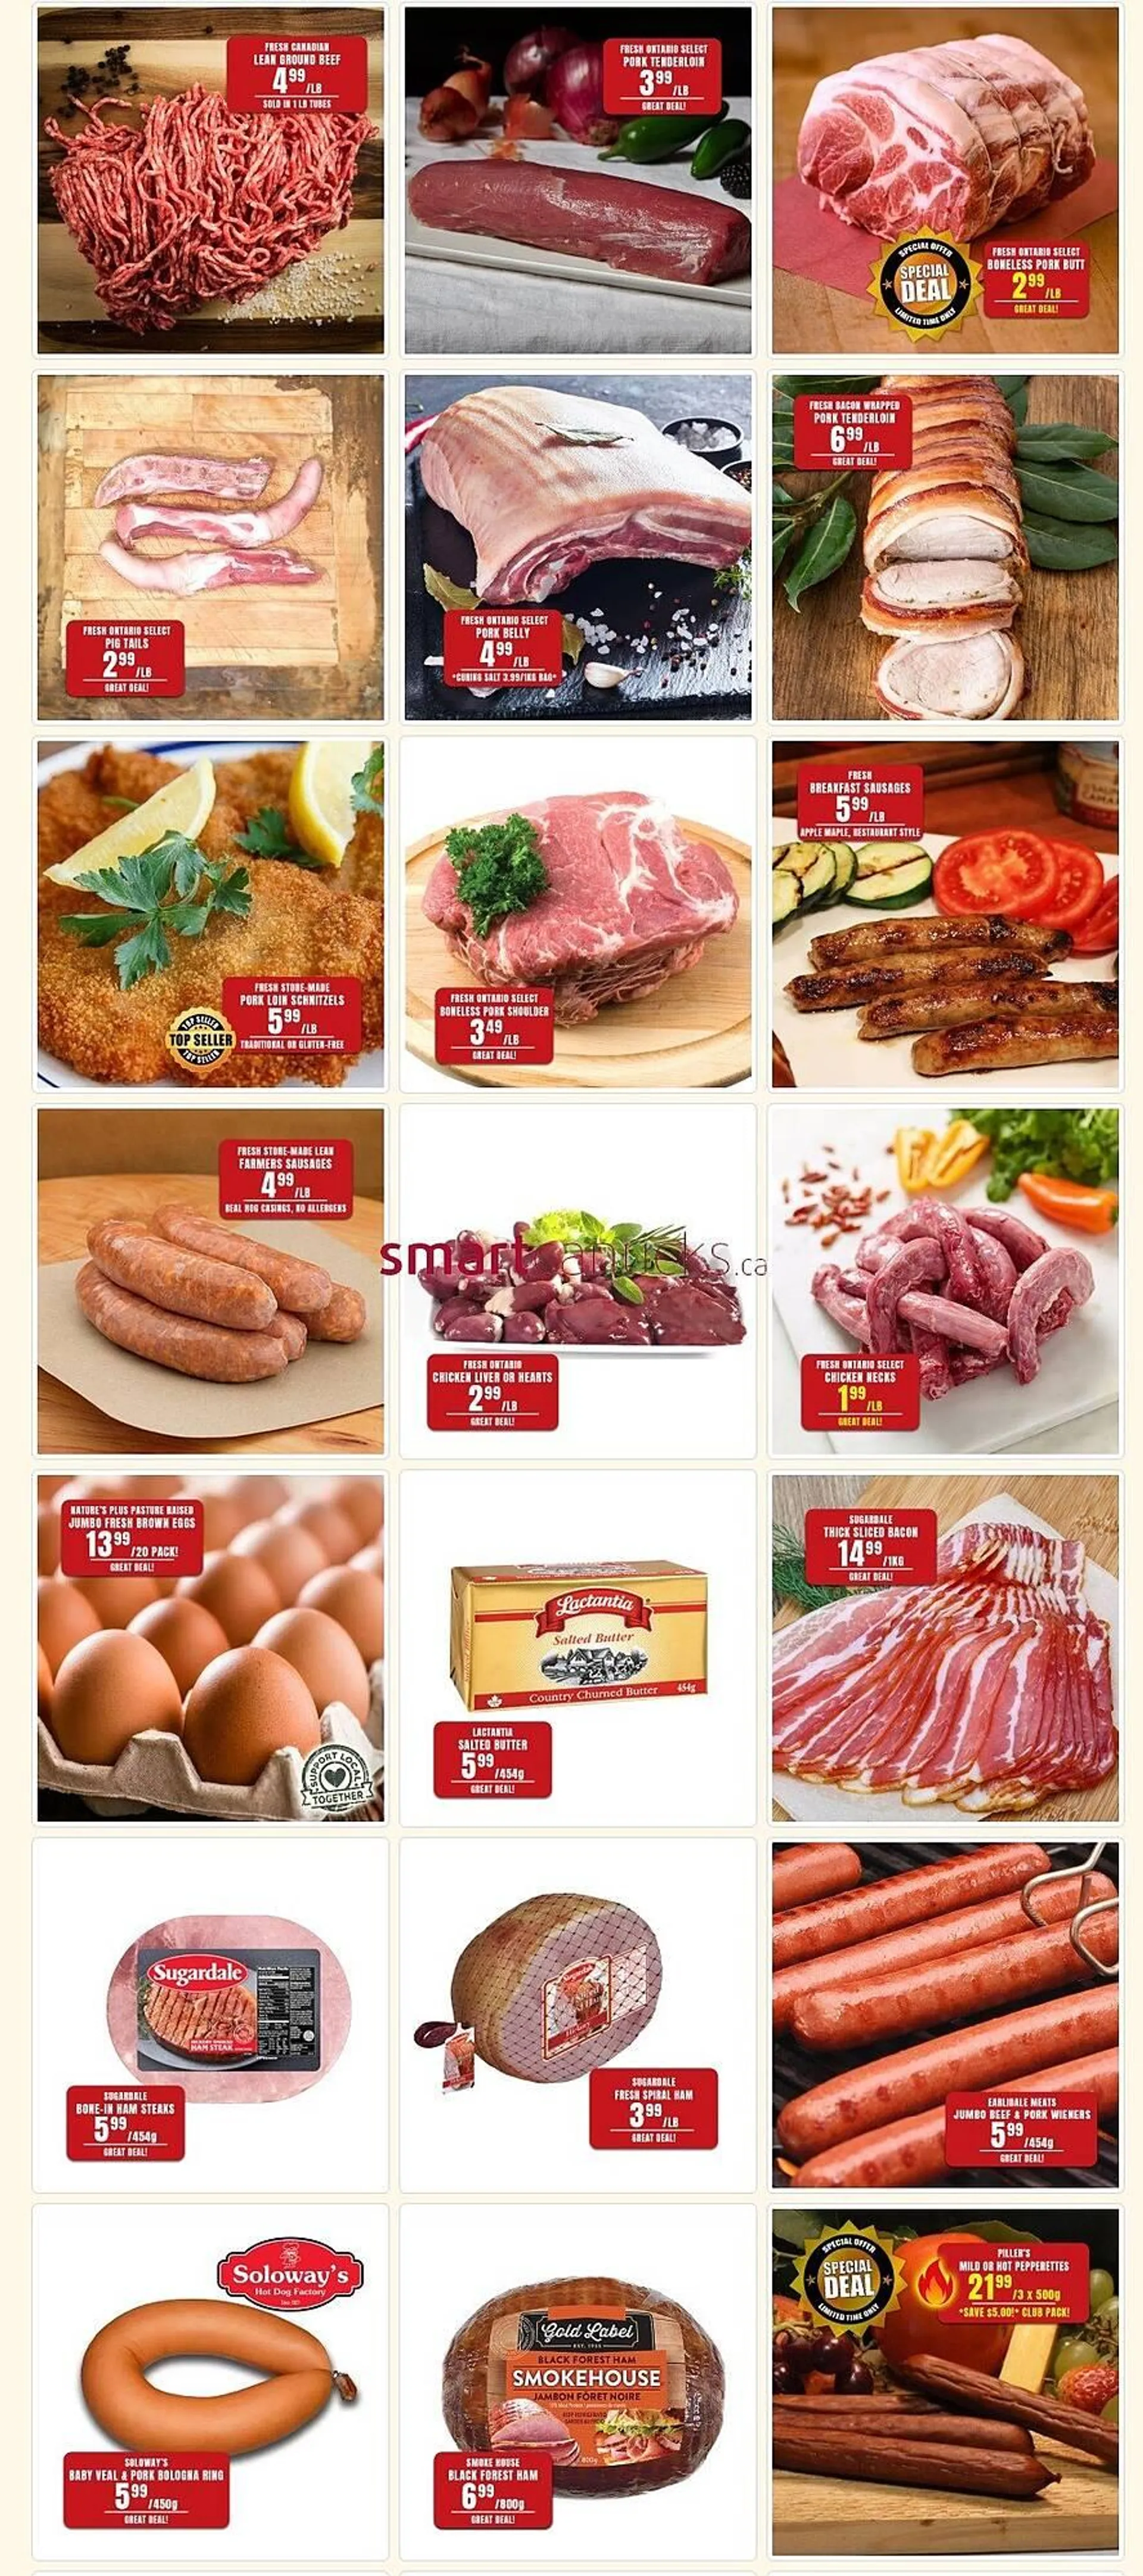 Roberts Fresh and Boxed Meats flyer - 2